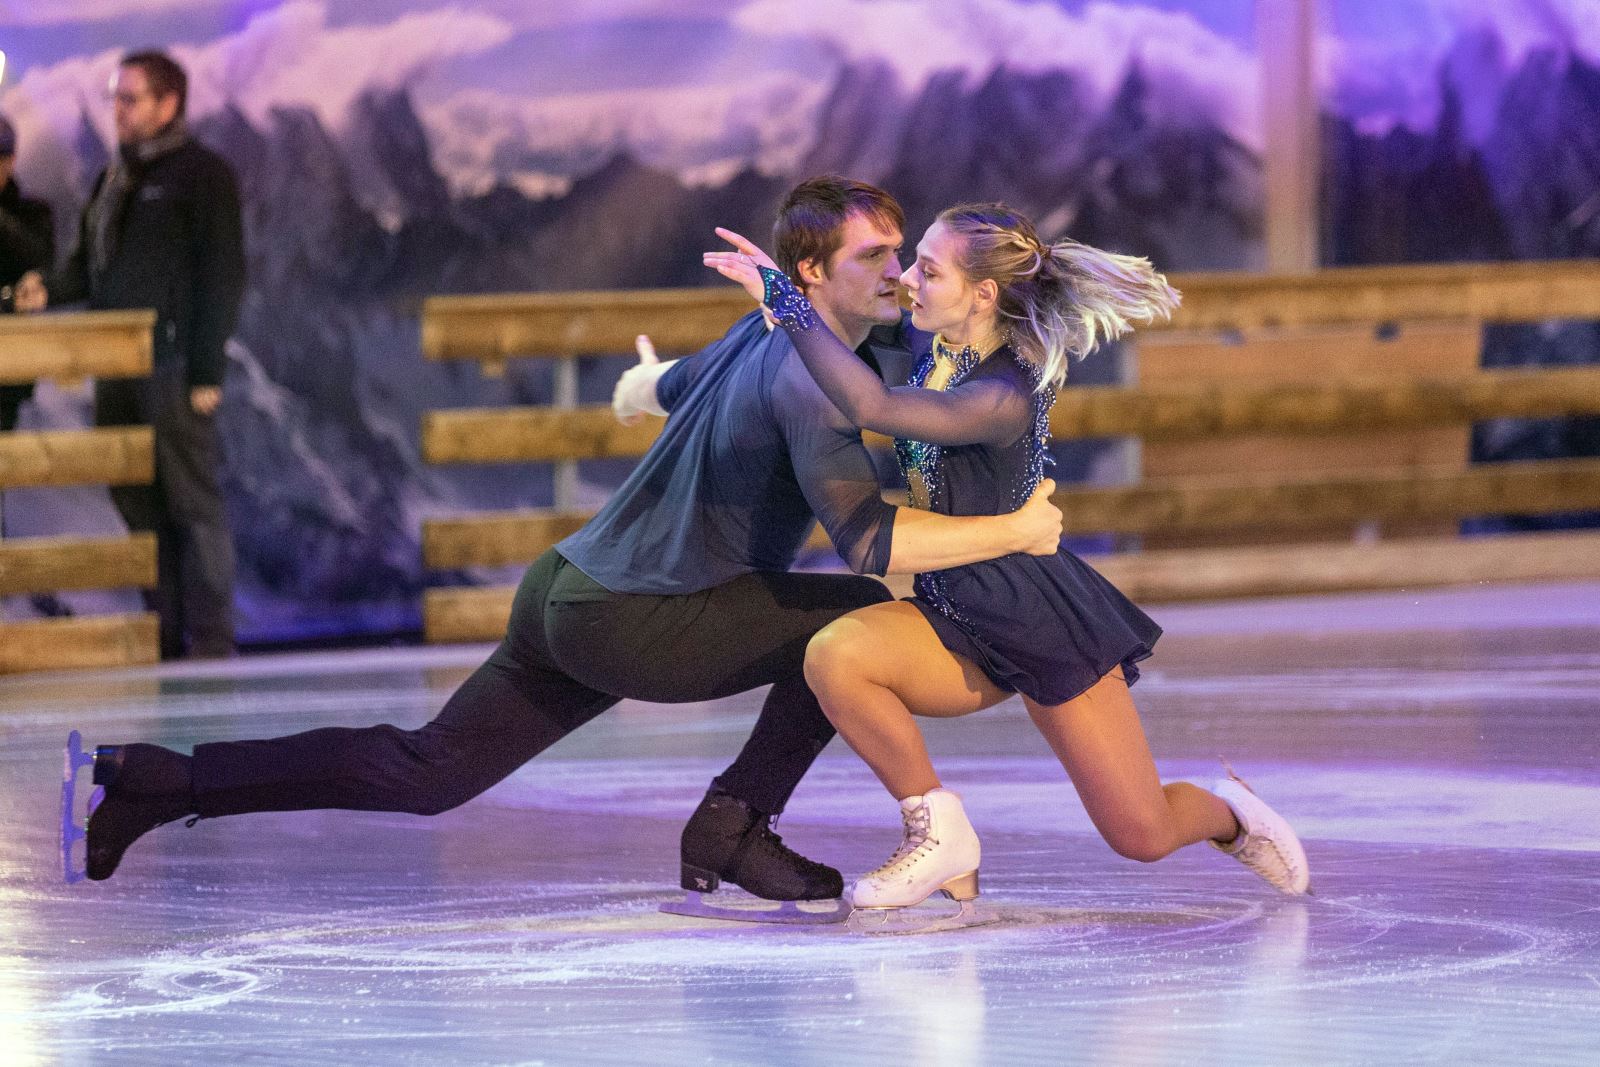 A man and a woman in ice dance costumes performing an ice dance routine